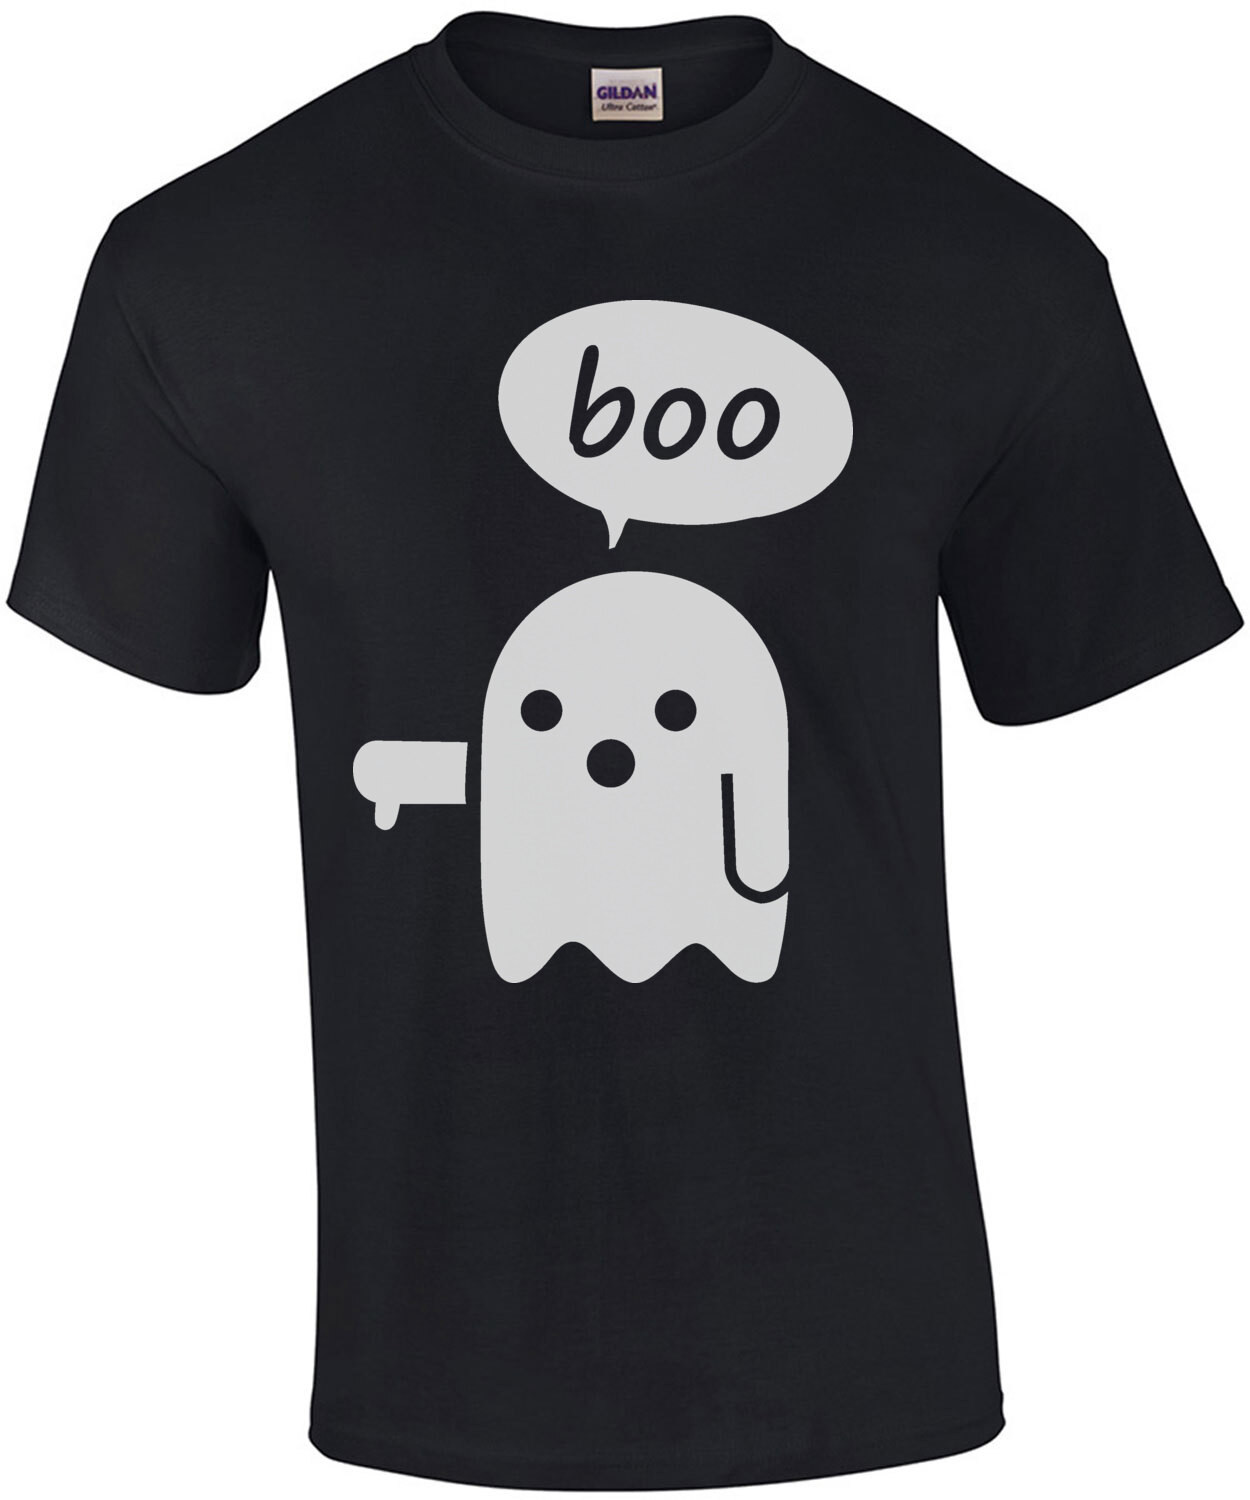 Boo Disapproval Ghost - funny halloween t-shirt